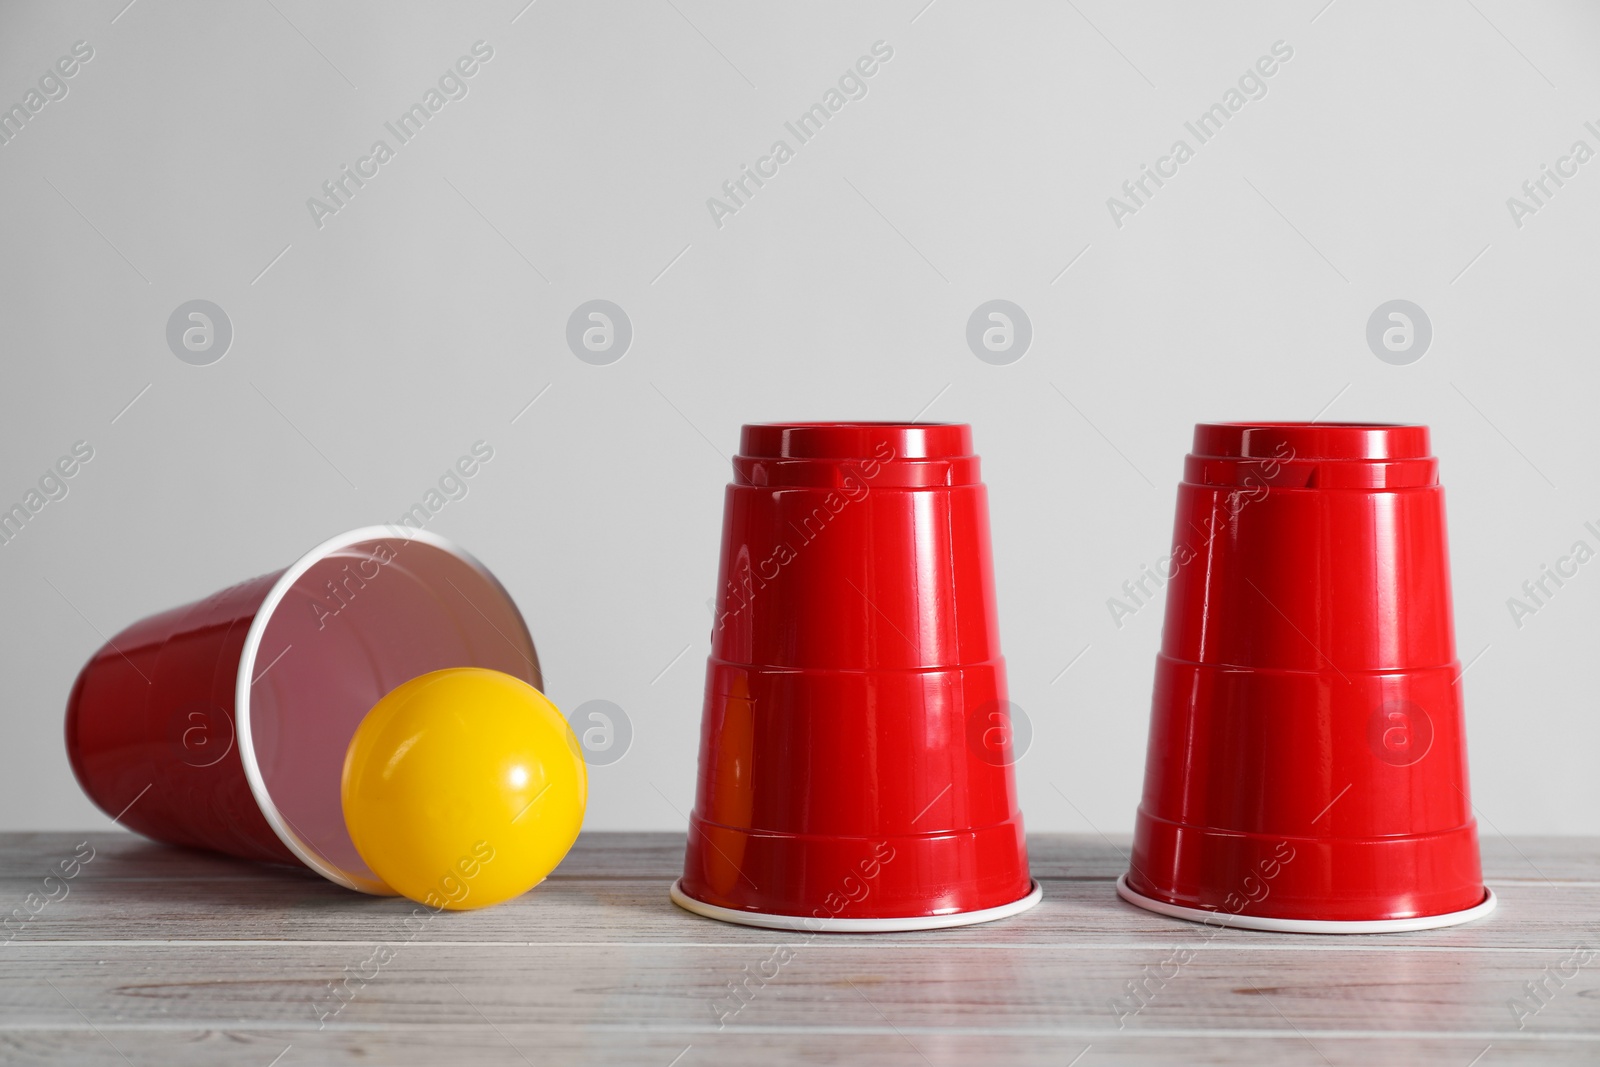 Photo of Shell game. Three red cups and ball on wooden table